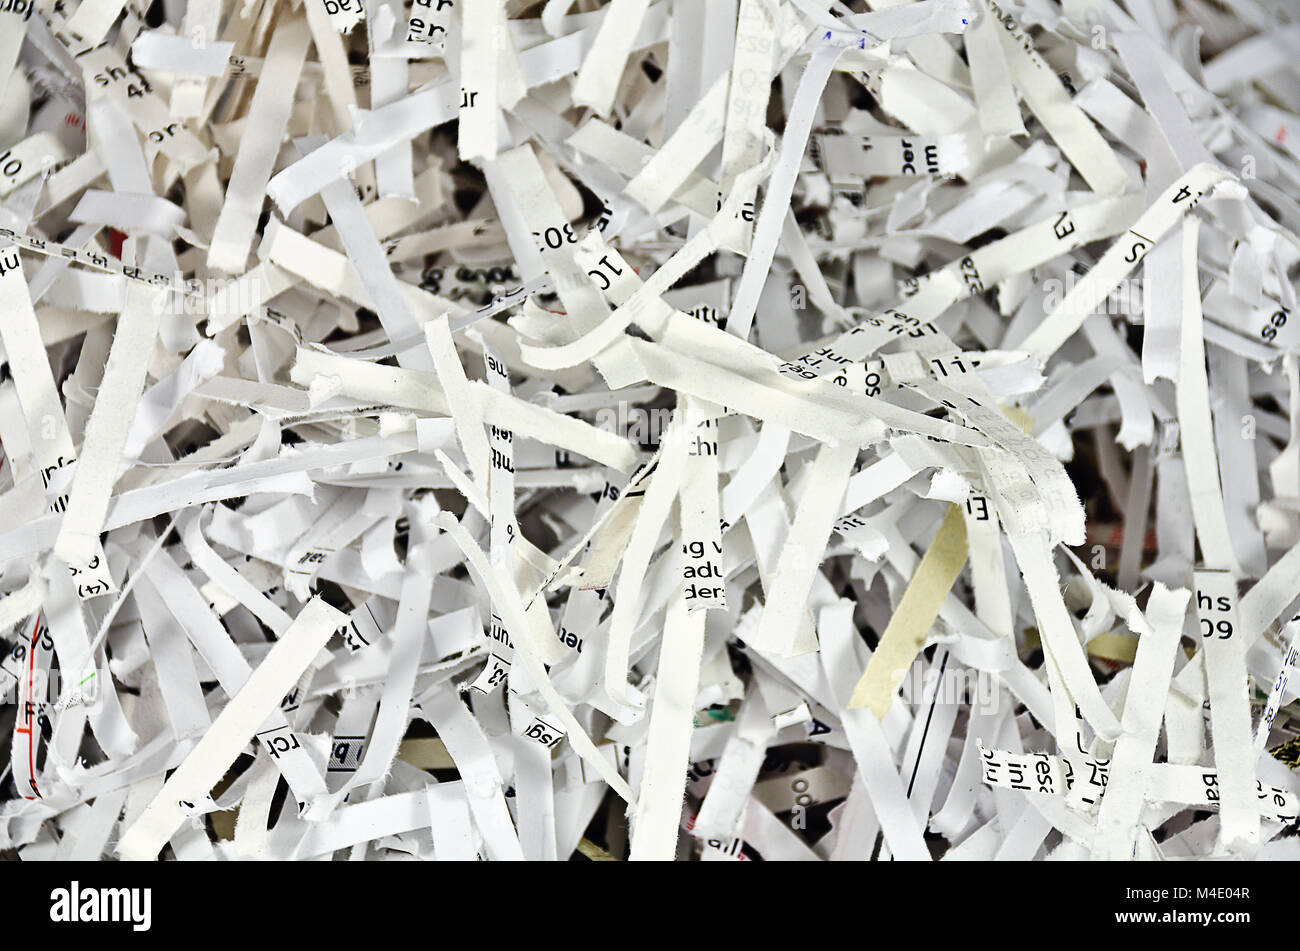 stripes of shredded papers Stock Photo